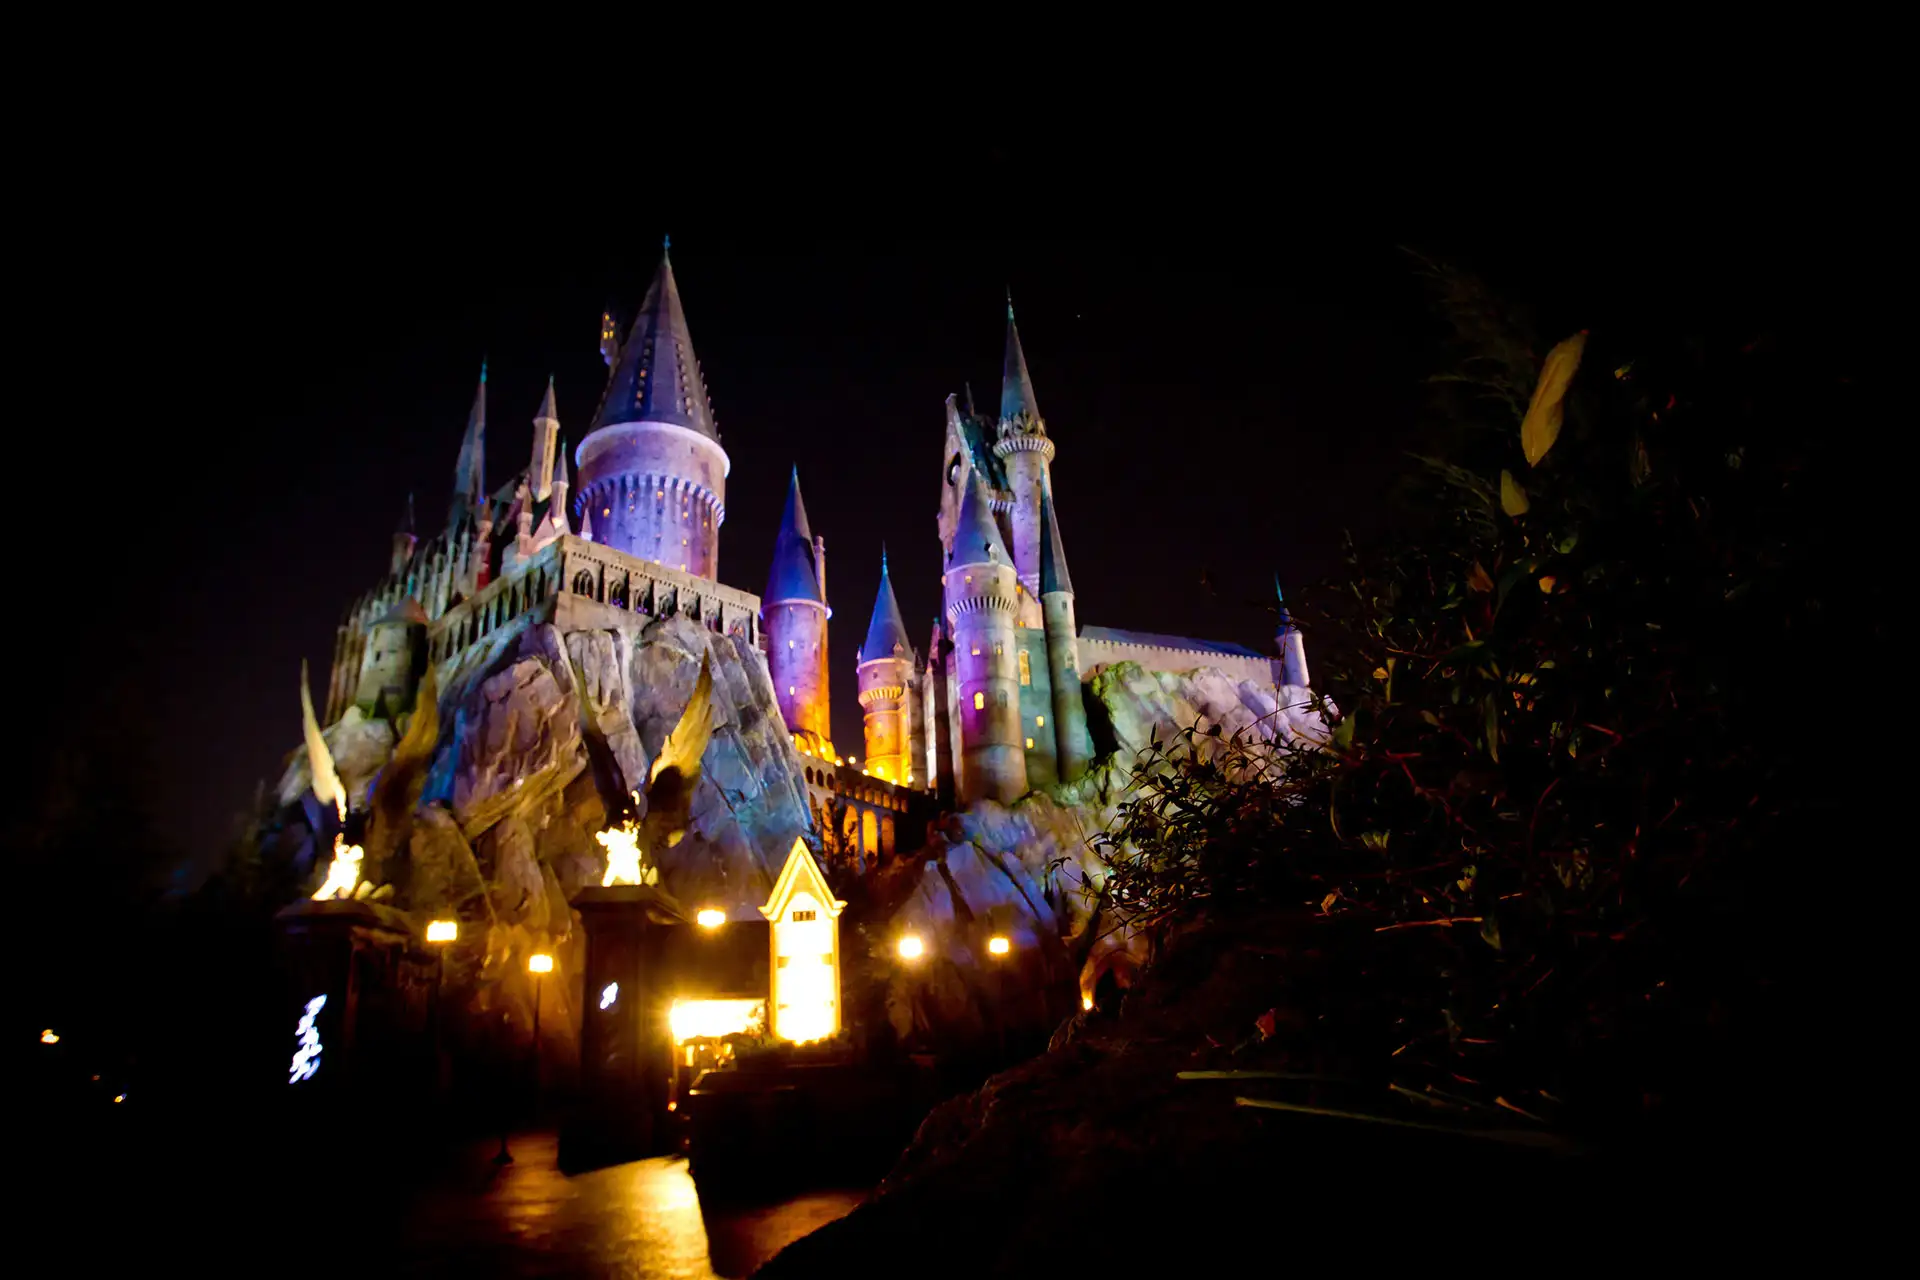 Nighttime at The Wizarding World of Harry Potter